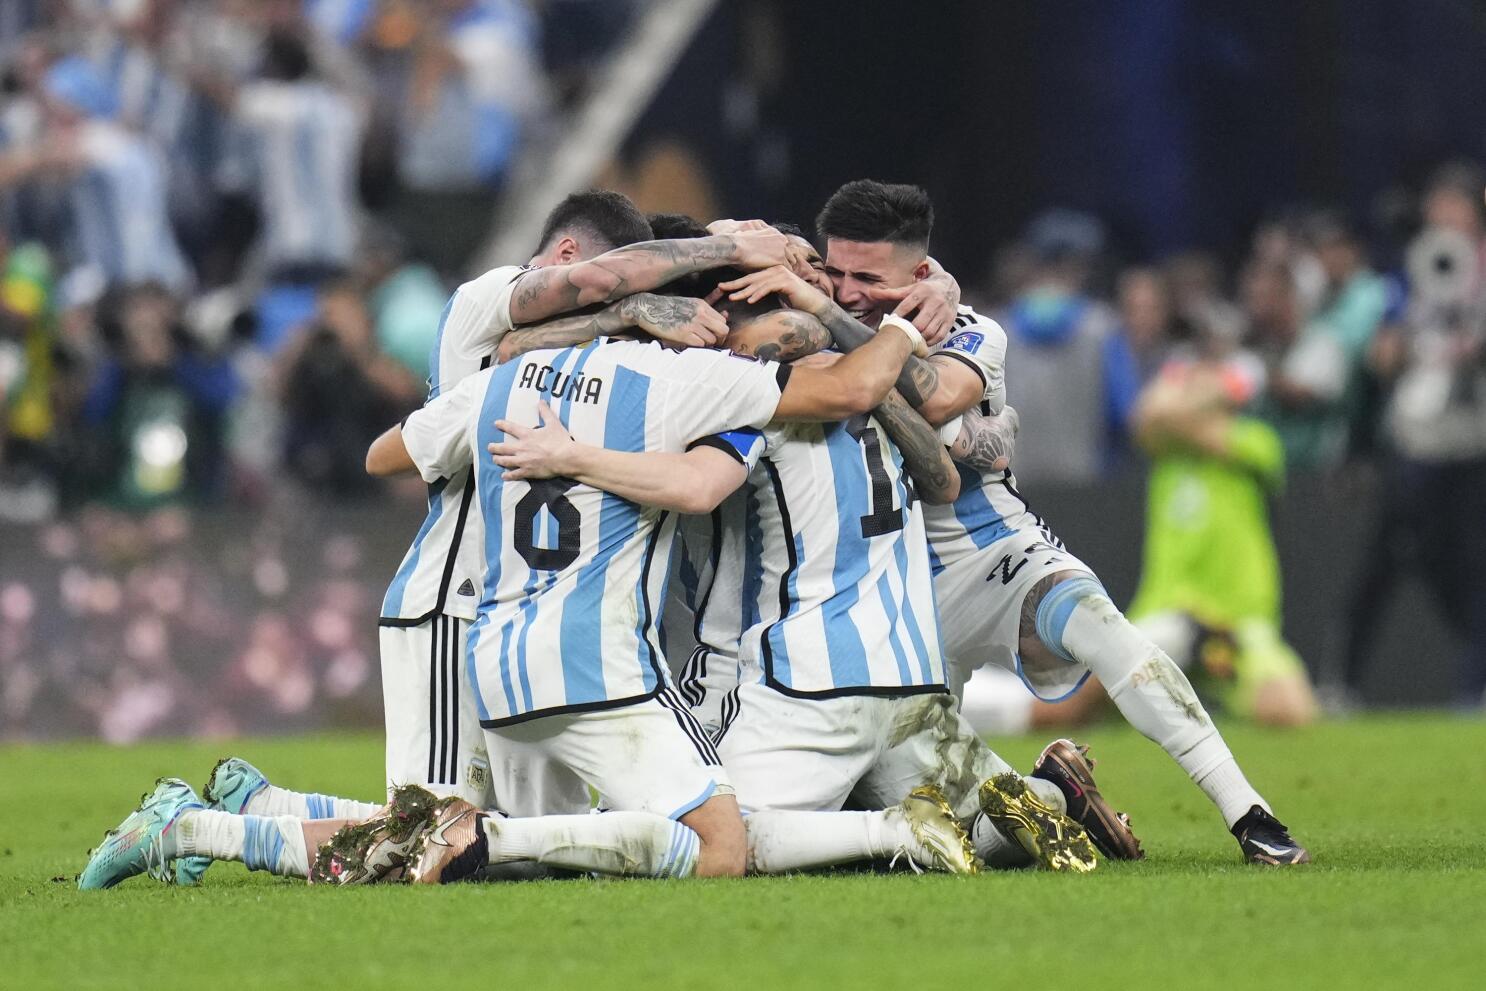 Fifa World Cup final, ARG vs FRA: Argentina new champions, win on